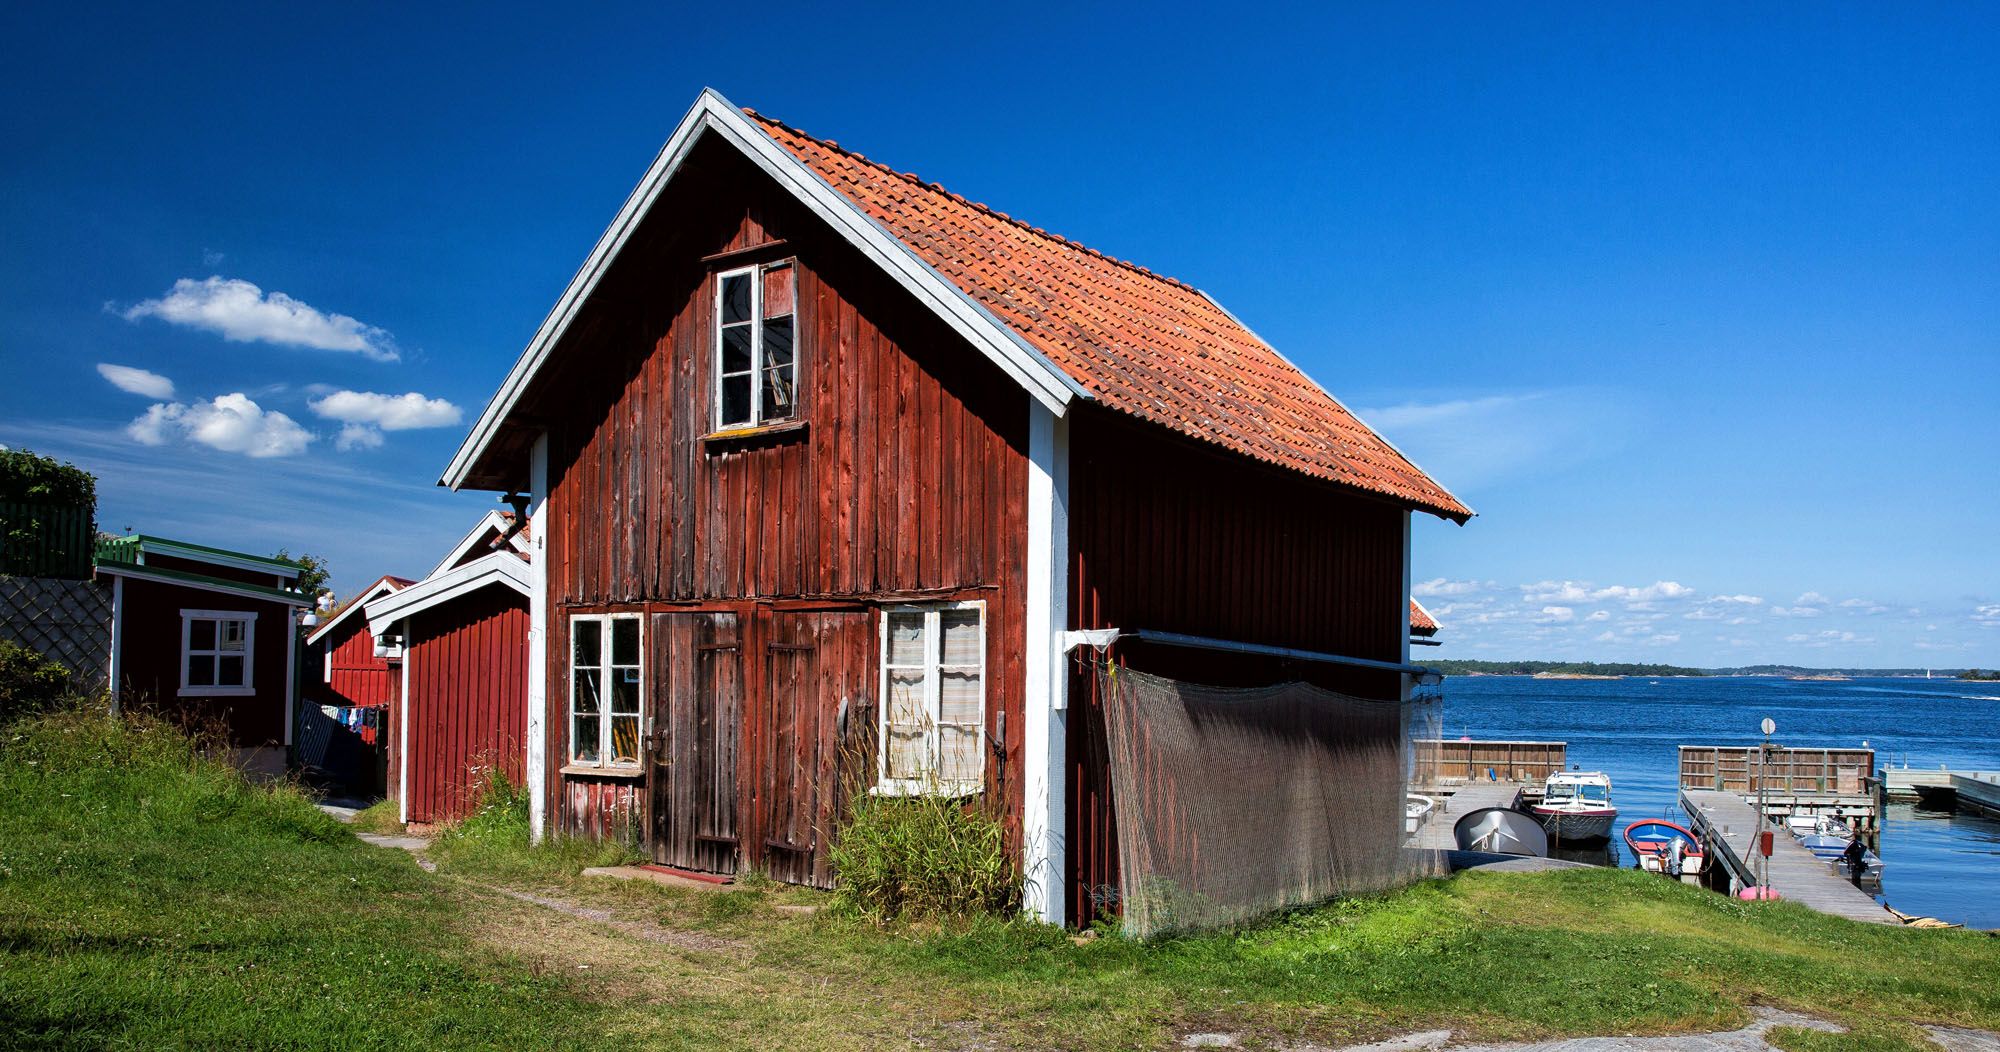 Featured image for “A Day Trip to Sandhamn, Sweden”